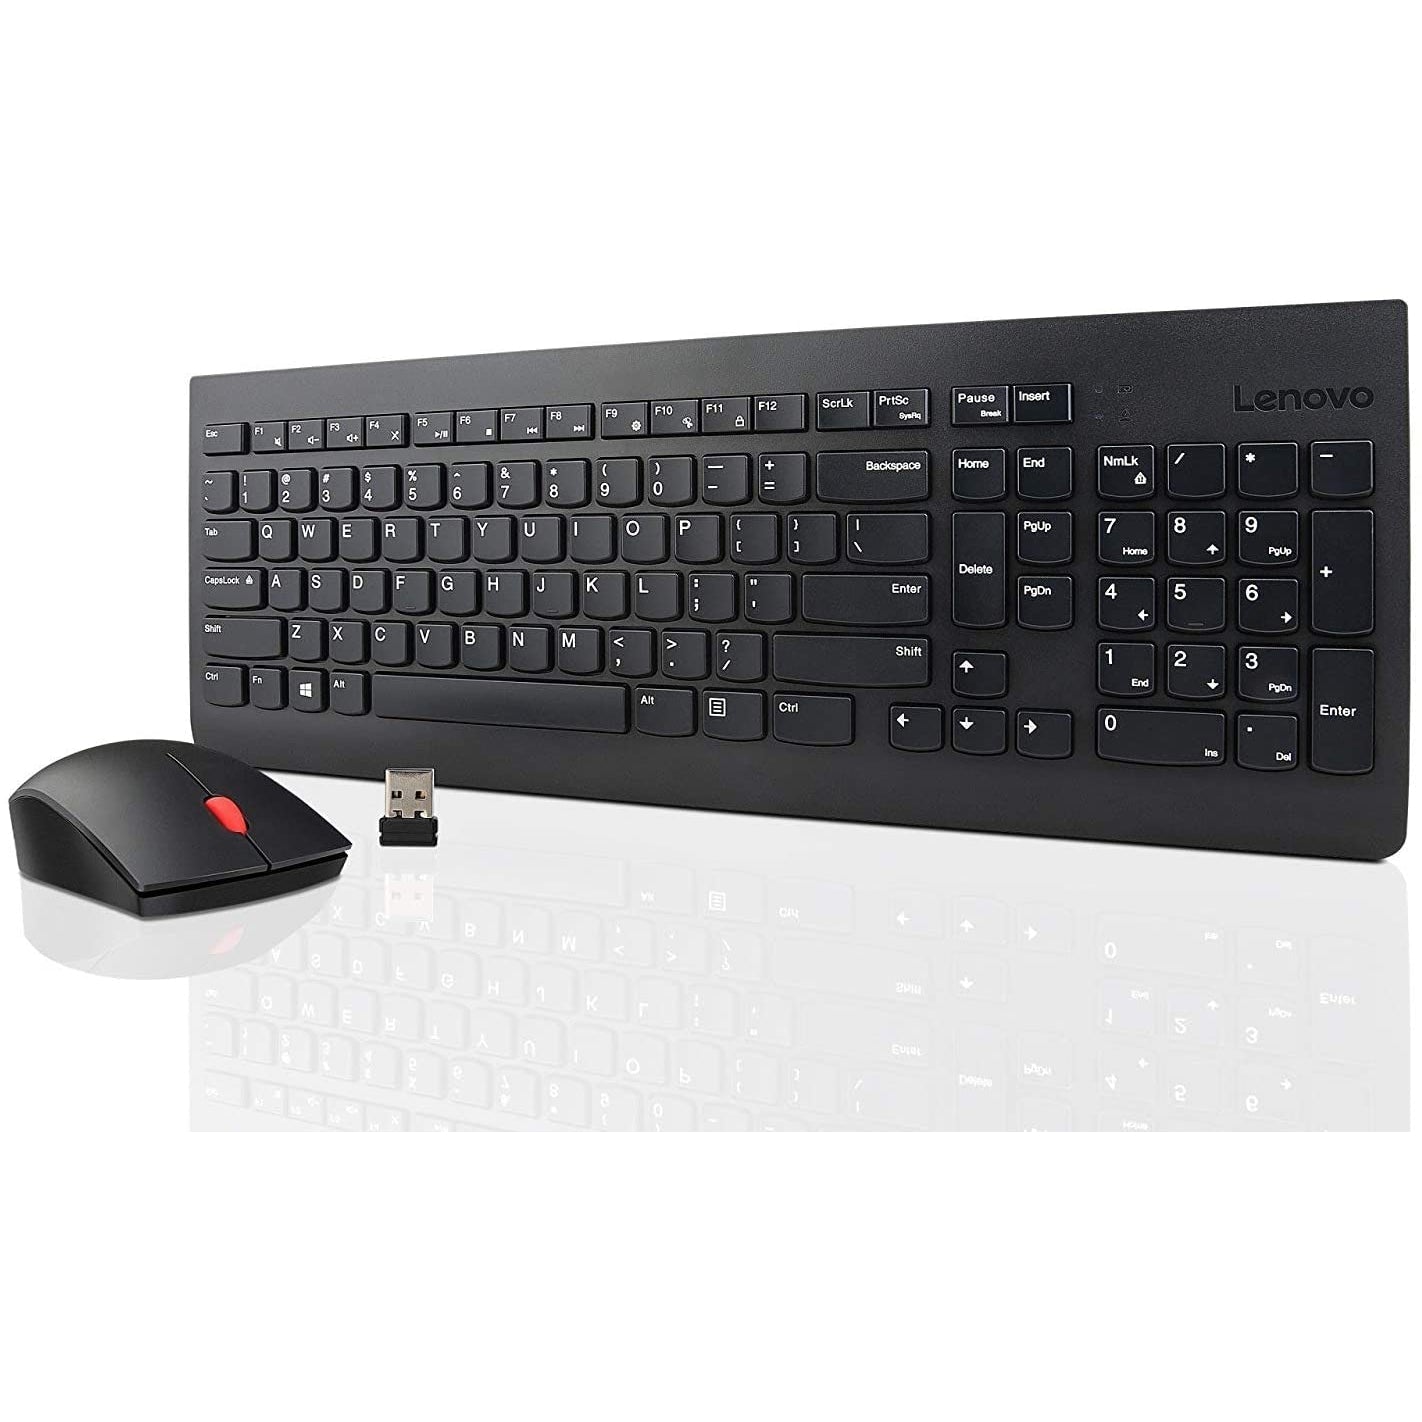 Lenovo 4X30M39496 Essential Wireless Keyboard and Mouse Combo - Black - Refurbished Good